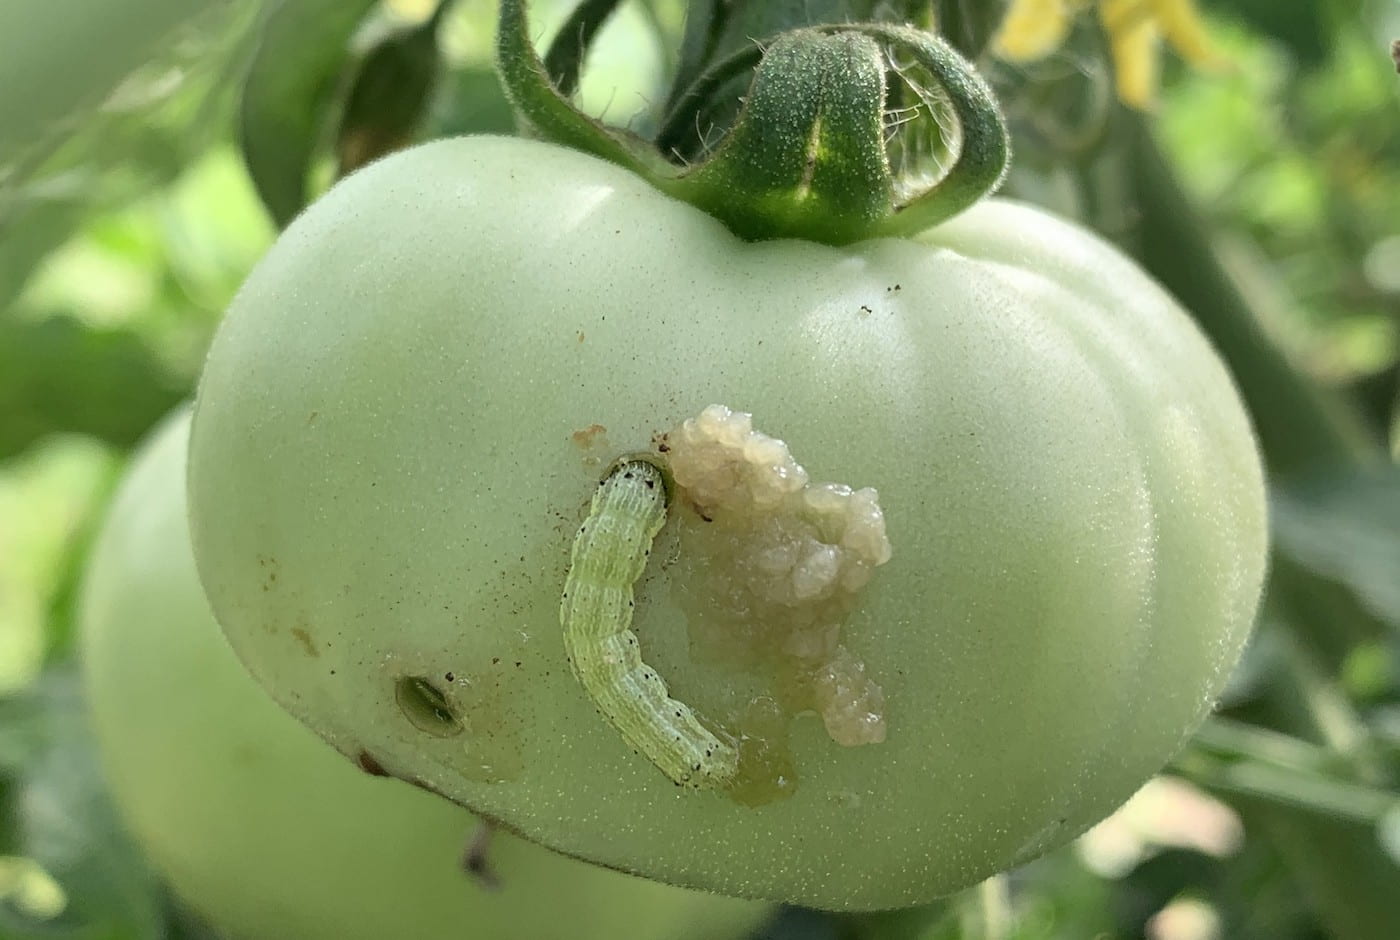 controling tomato pests and control